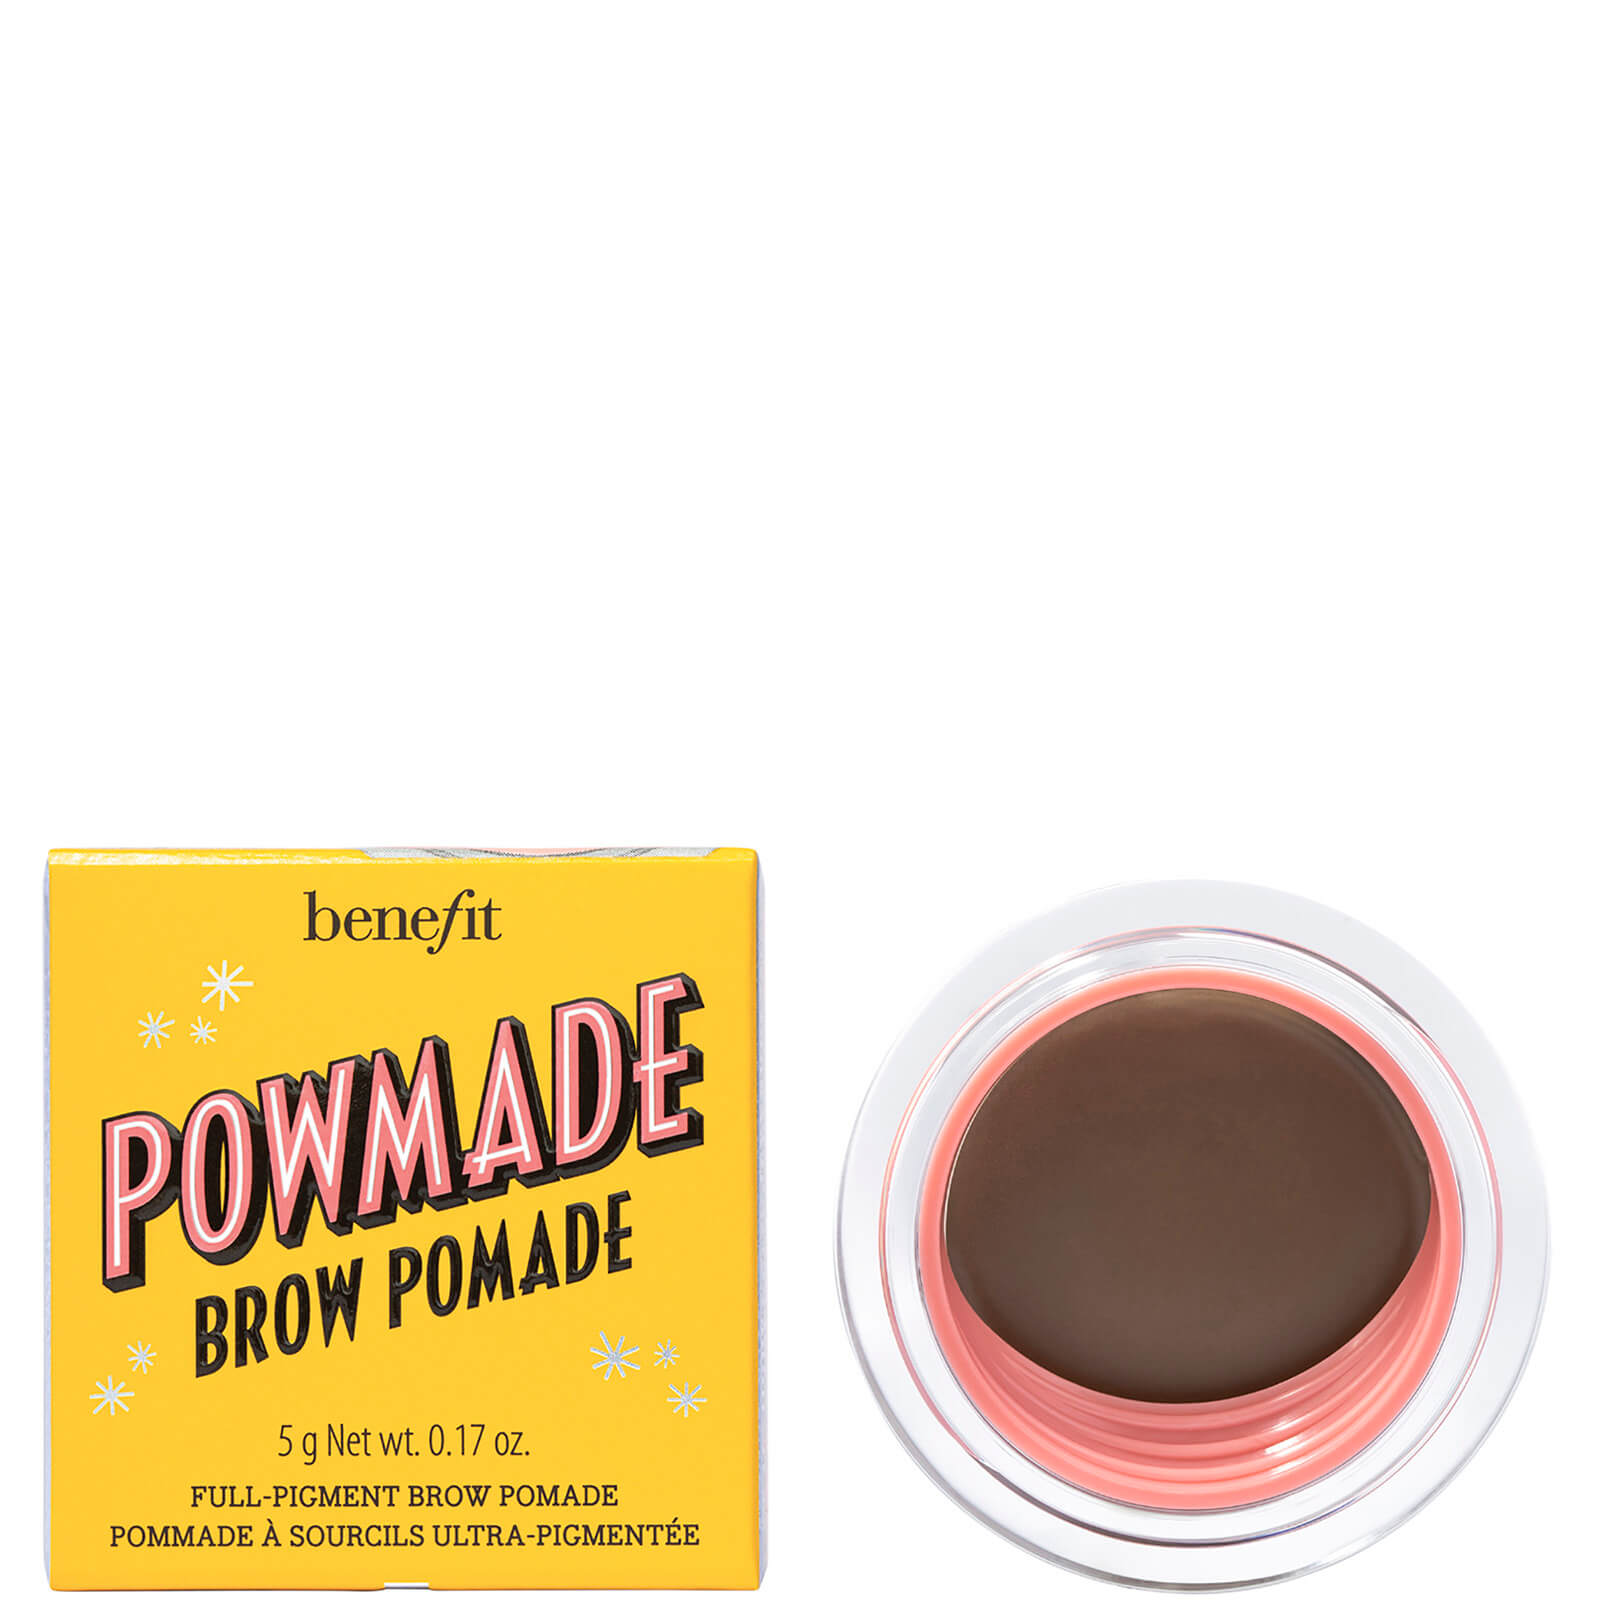 benefit Powmade Full Pigment Eyebrow Pomade 5g (Various Shades) - 2.5 Neutral Blonde